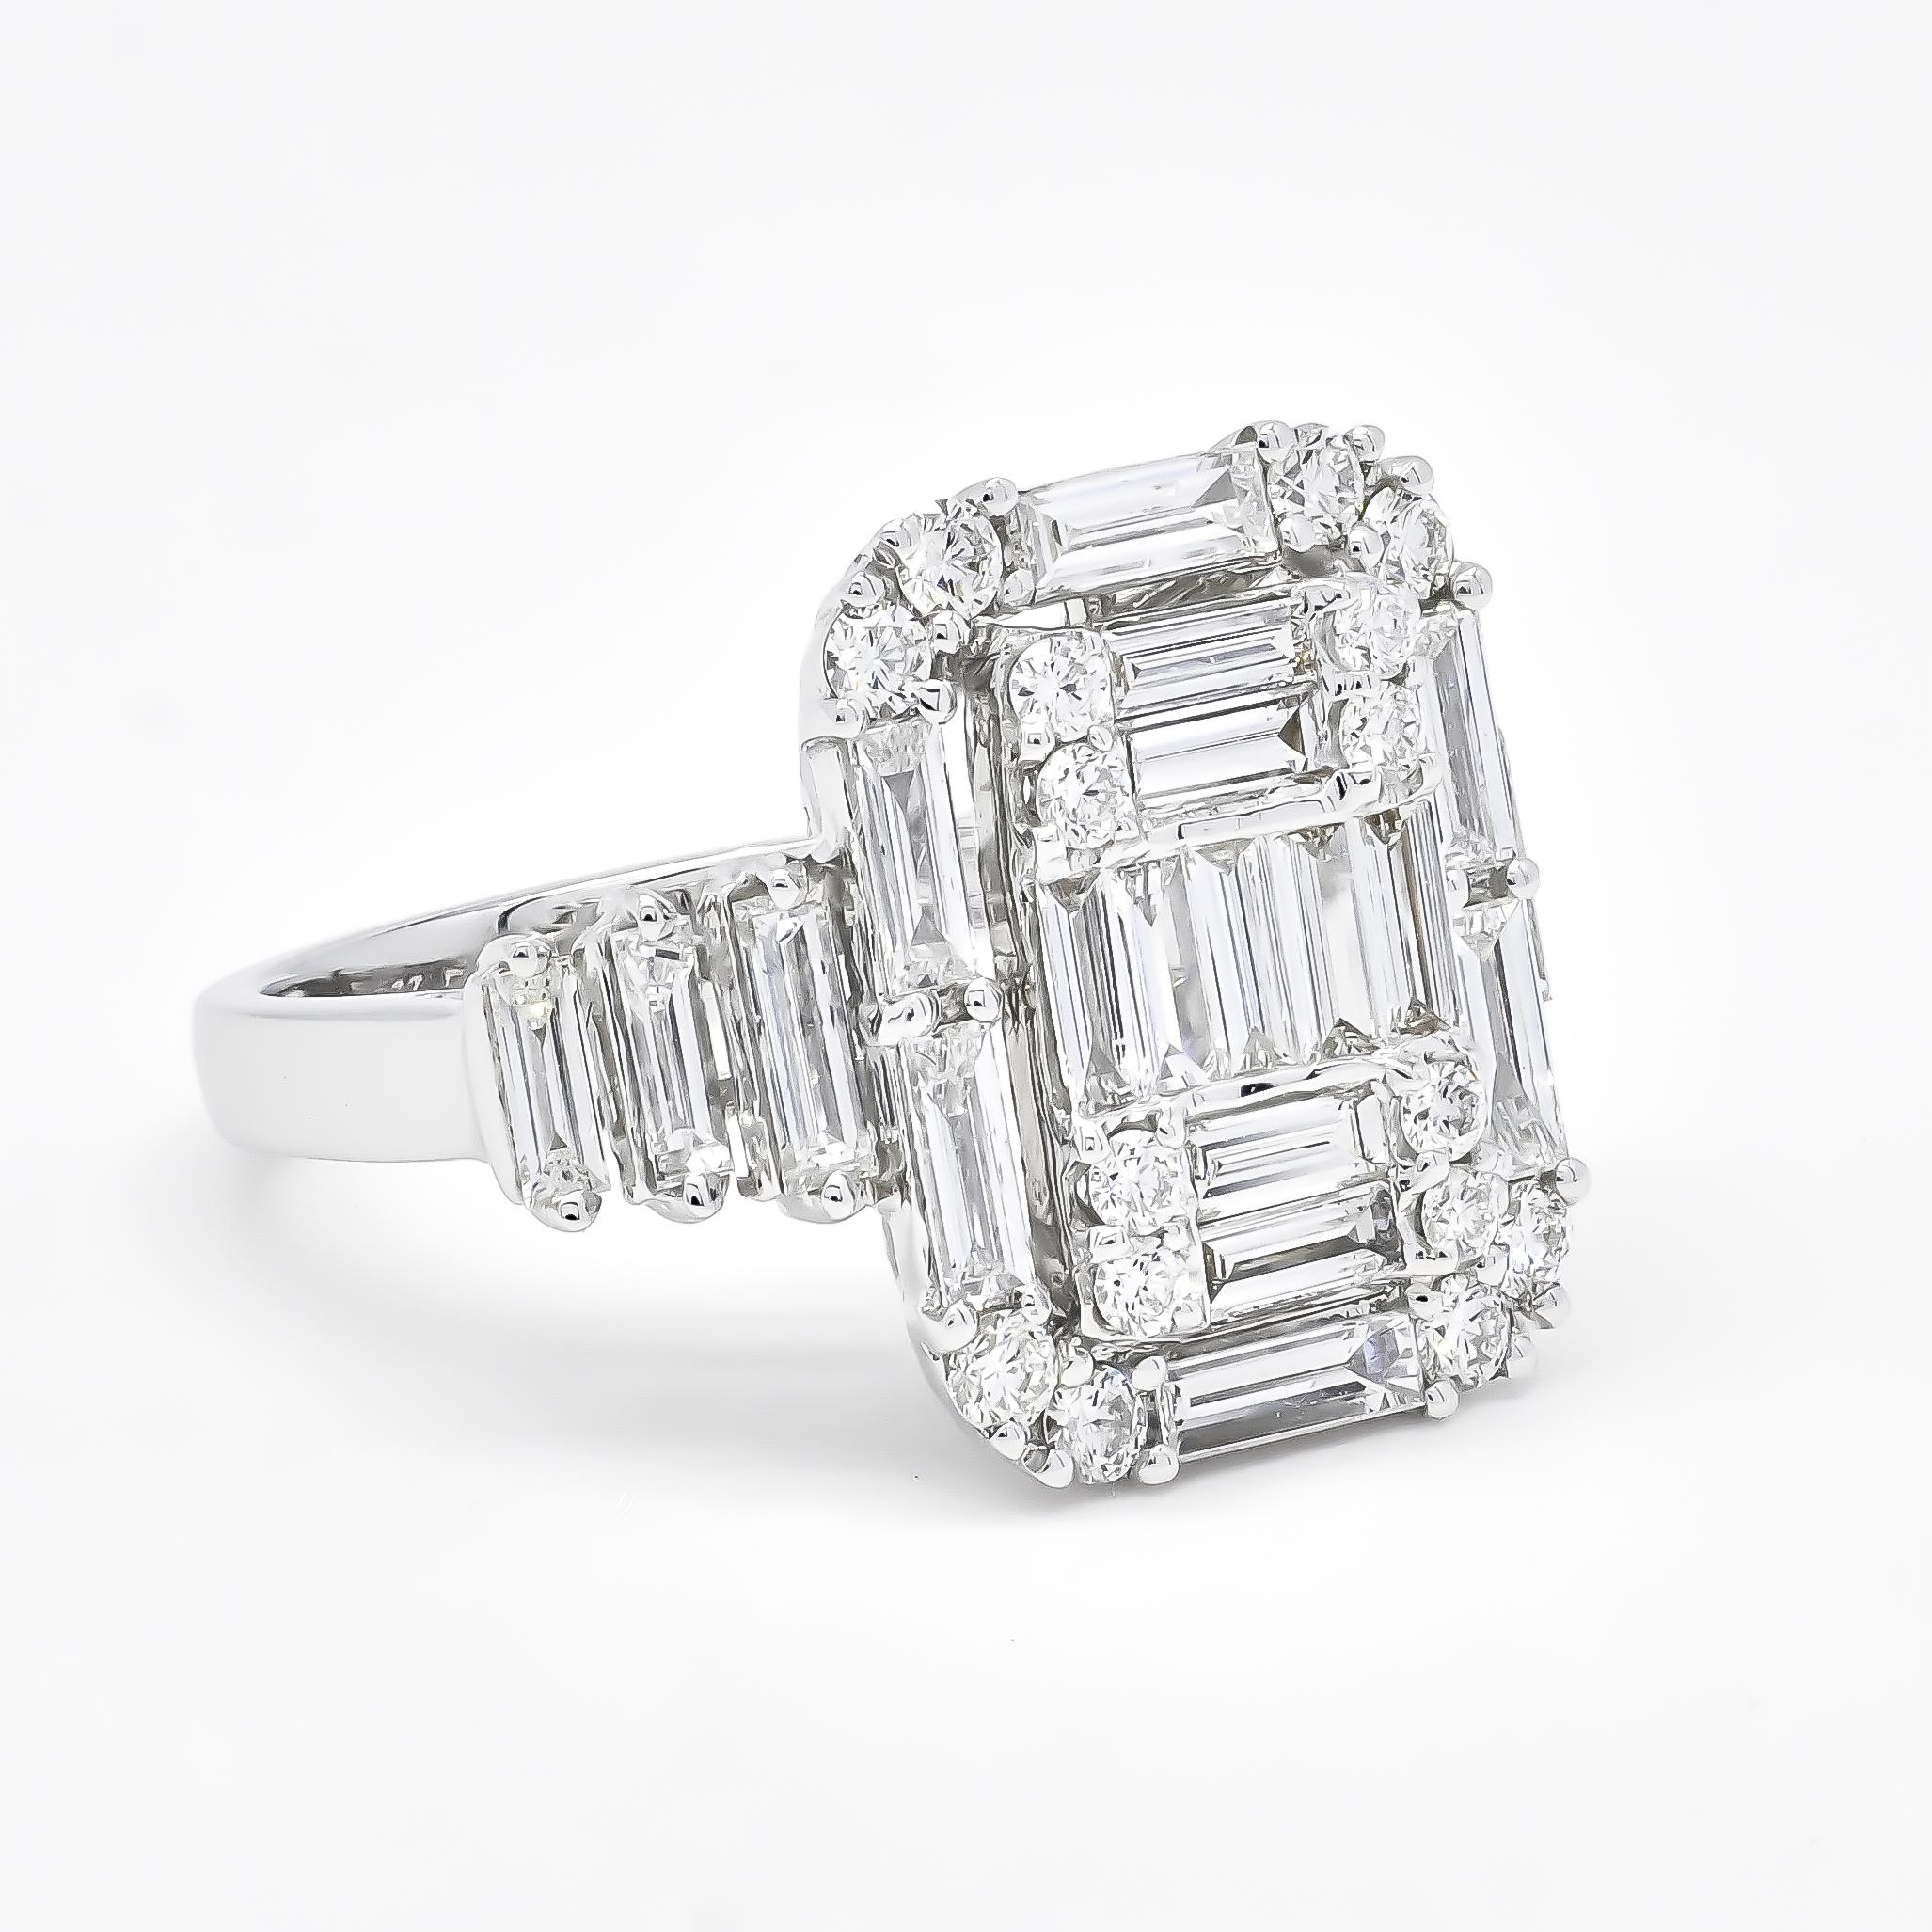 This 18KT White Gold Art Deco Baguette Round Diamond Illusion Step Cut Bridal Ring is luxurious and elegant. The intricate design features a mesmerizing illusion step cut, showcasing the sparkling round diamonds in a stunning baguette setting. 

The